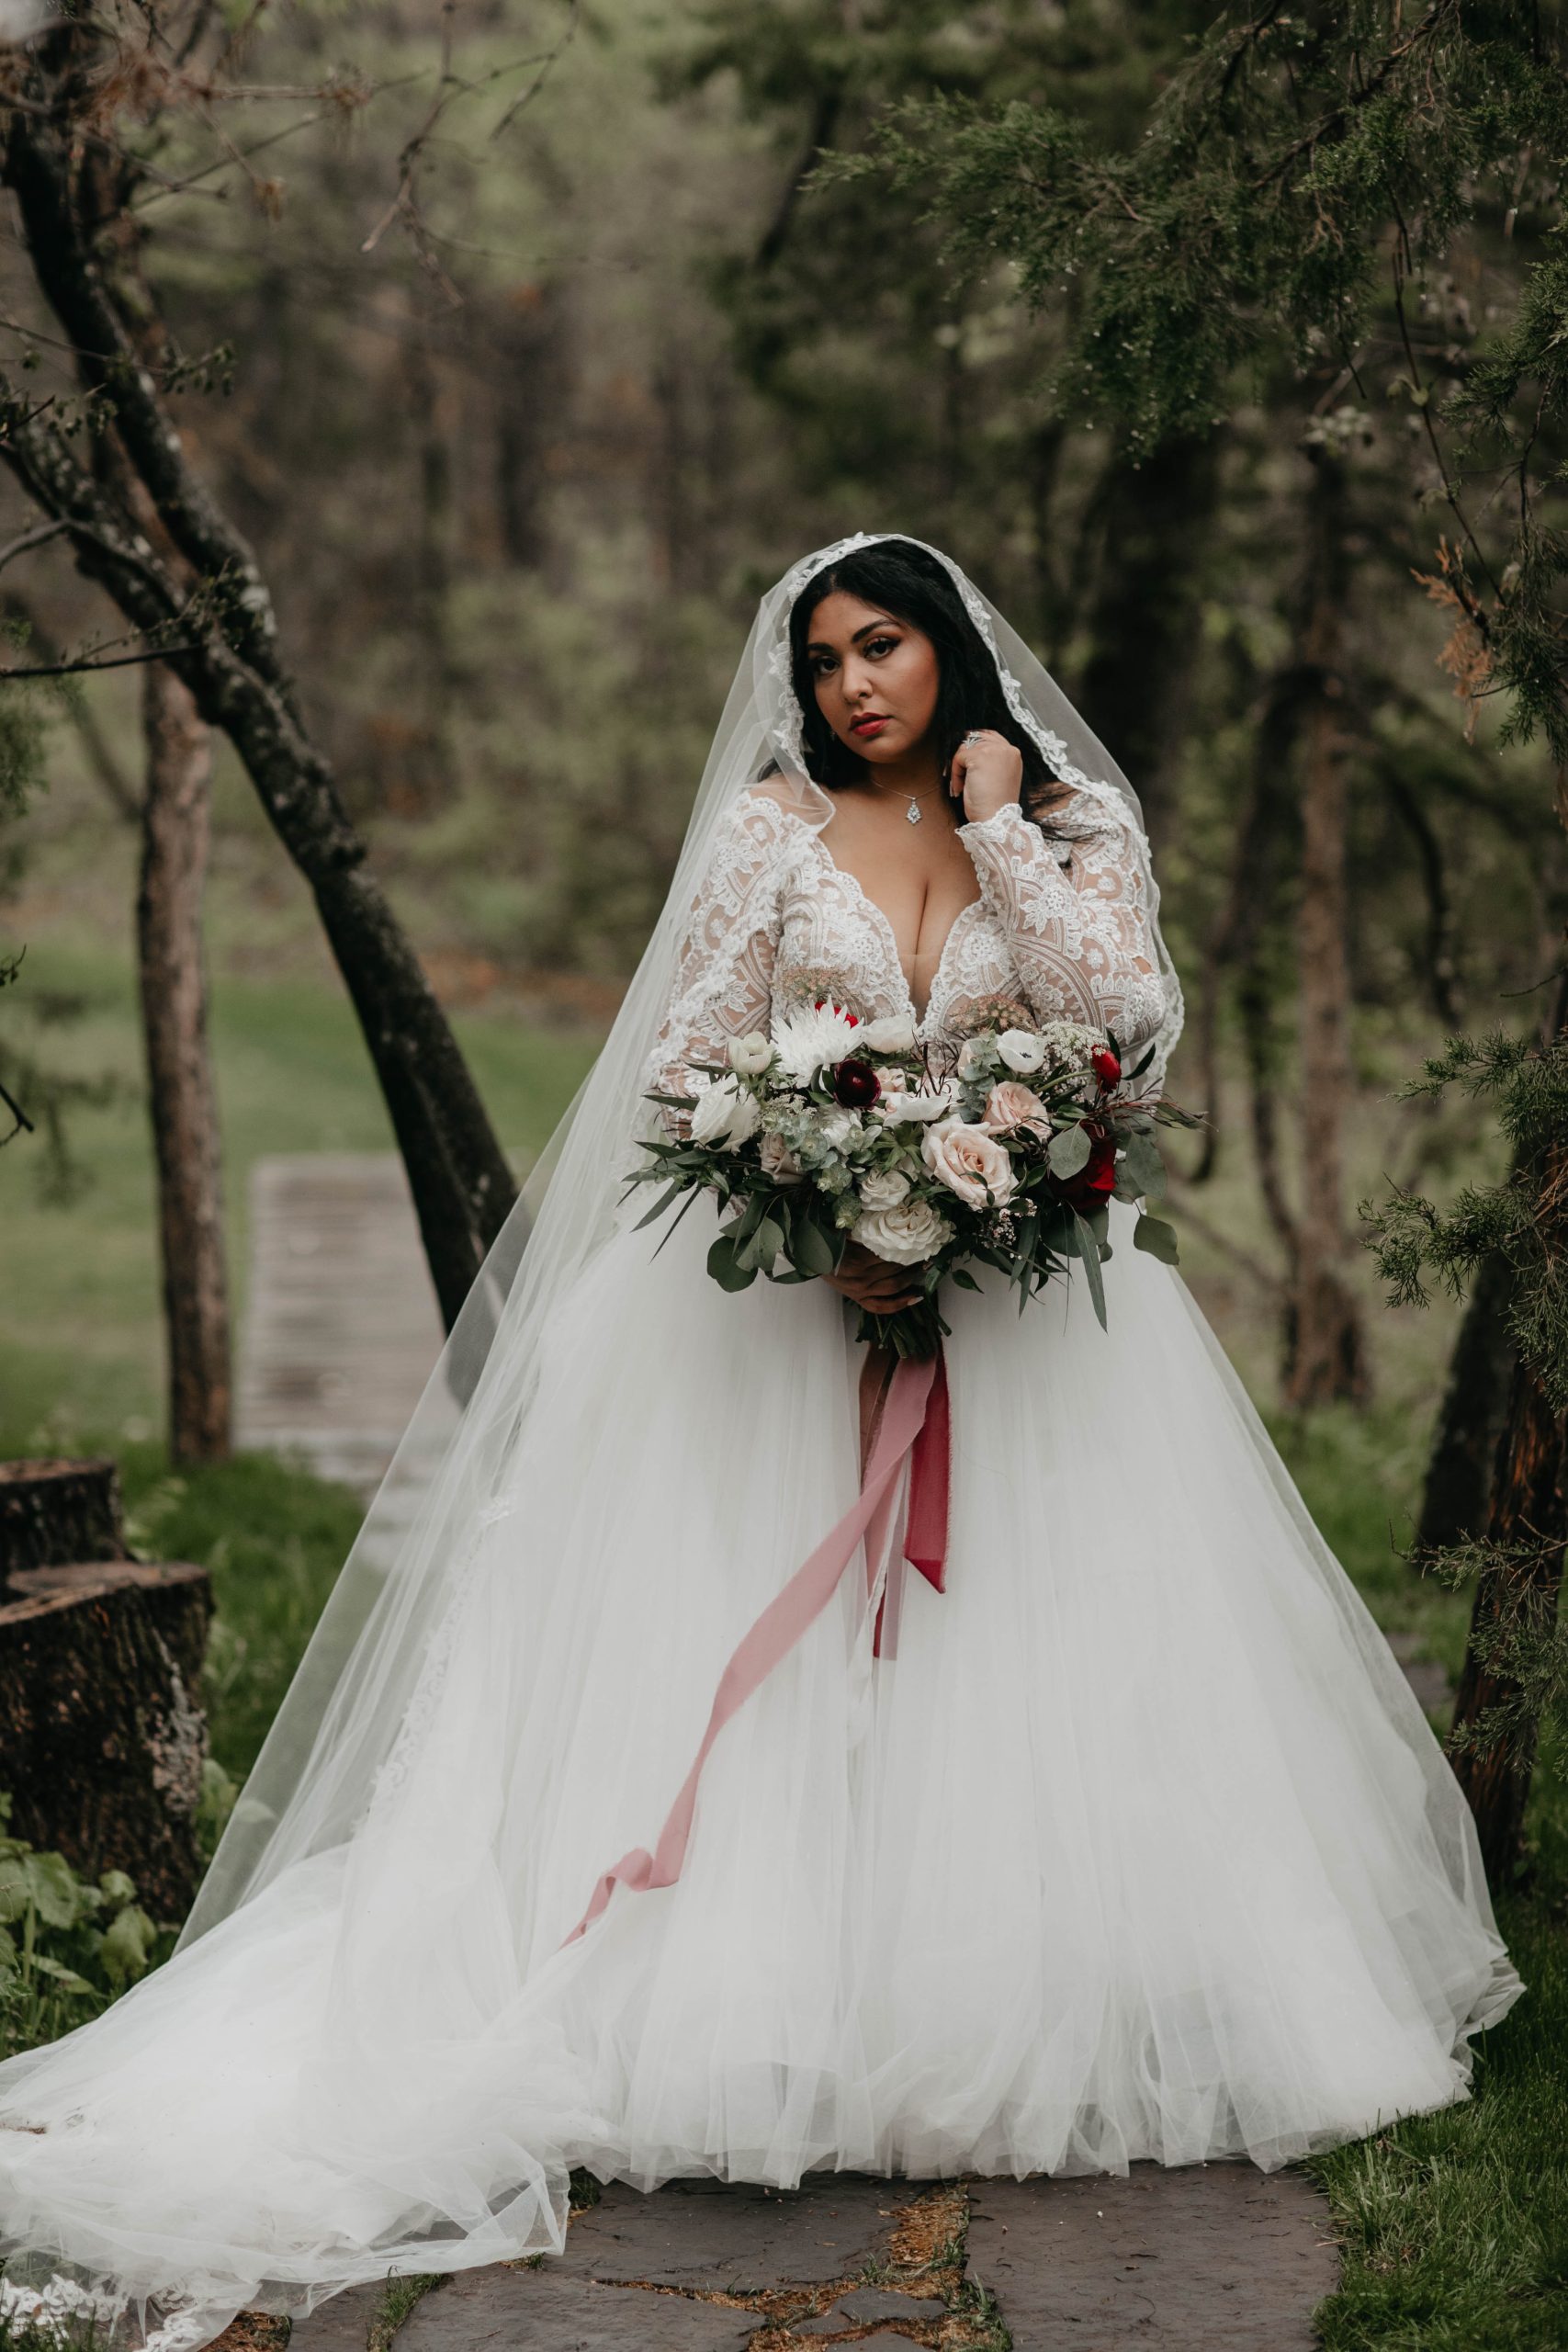 Bride In Lace Harry Potter Wedding Dress Called Mallory Dawn By Maggie Sottero